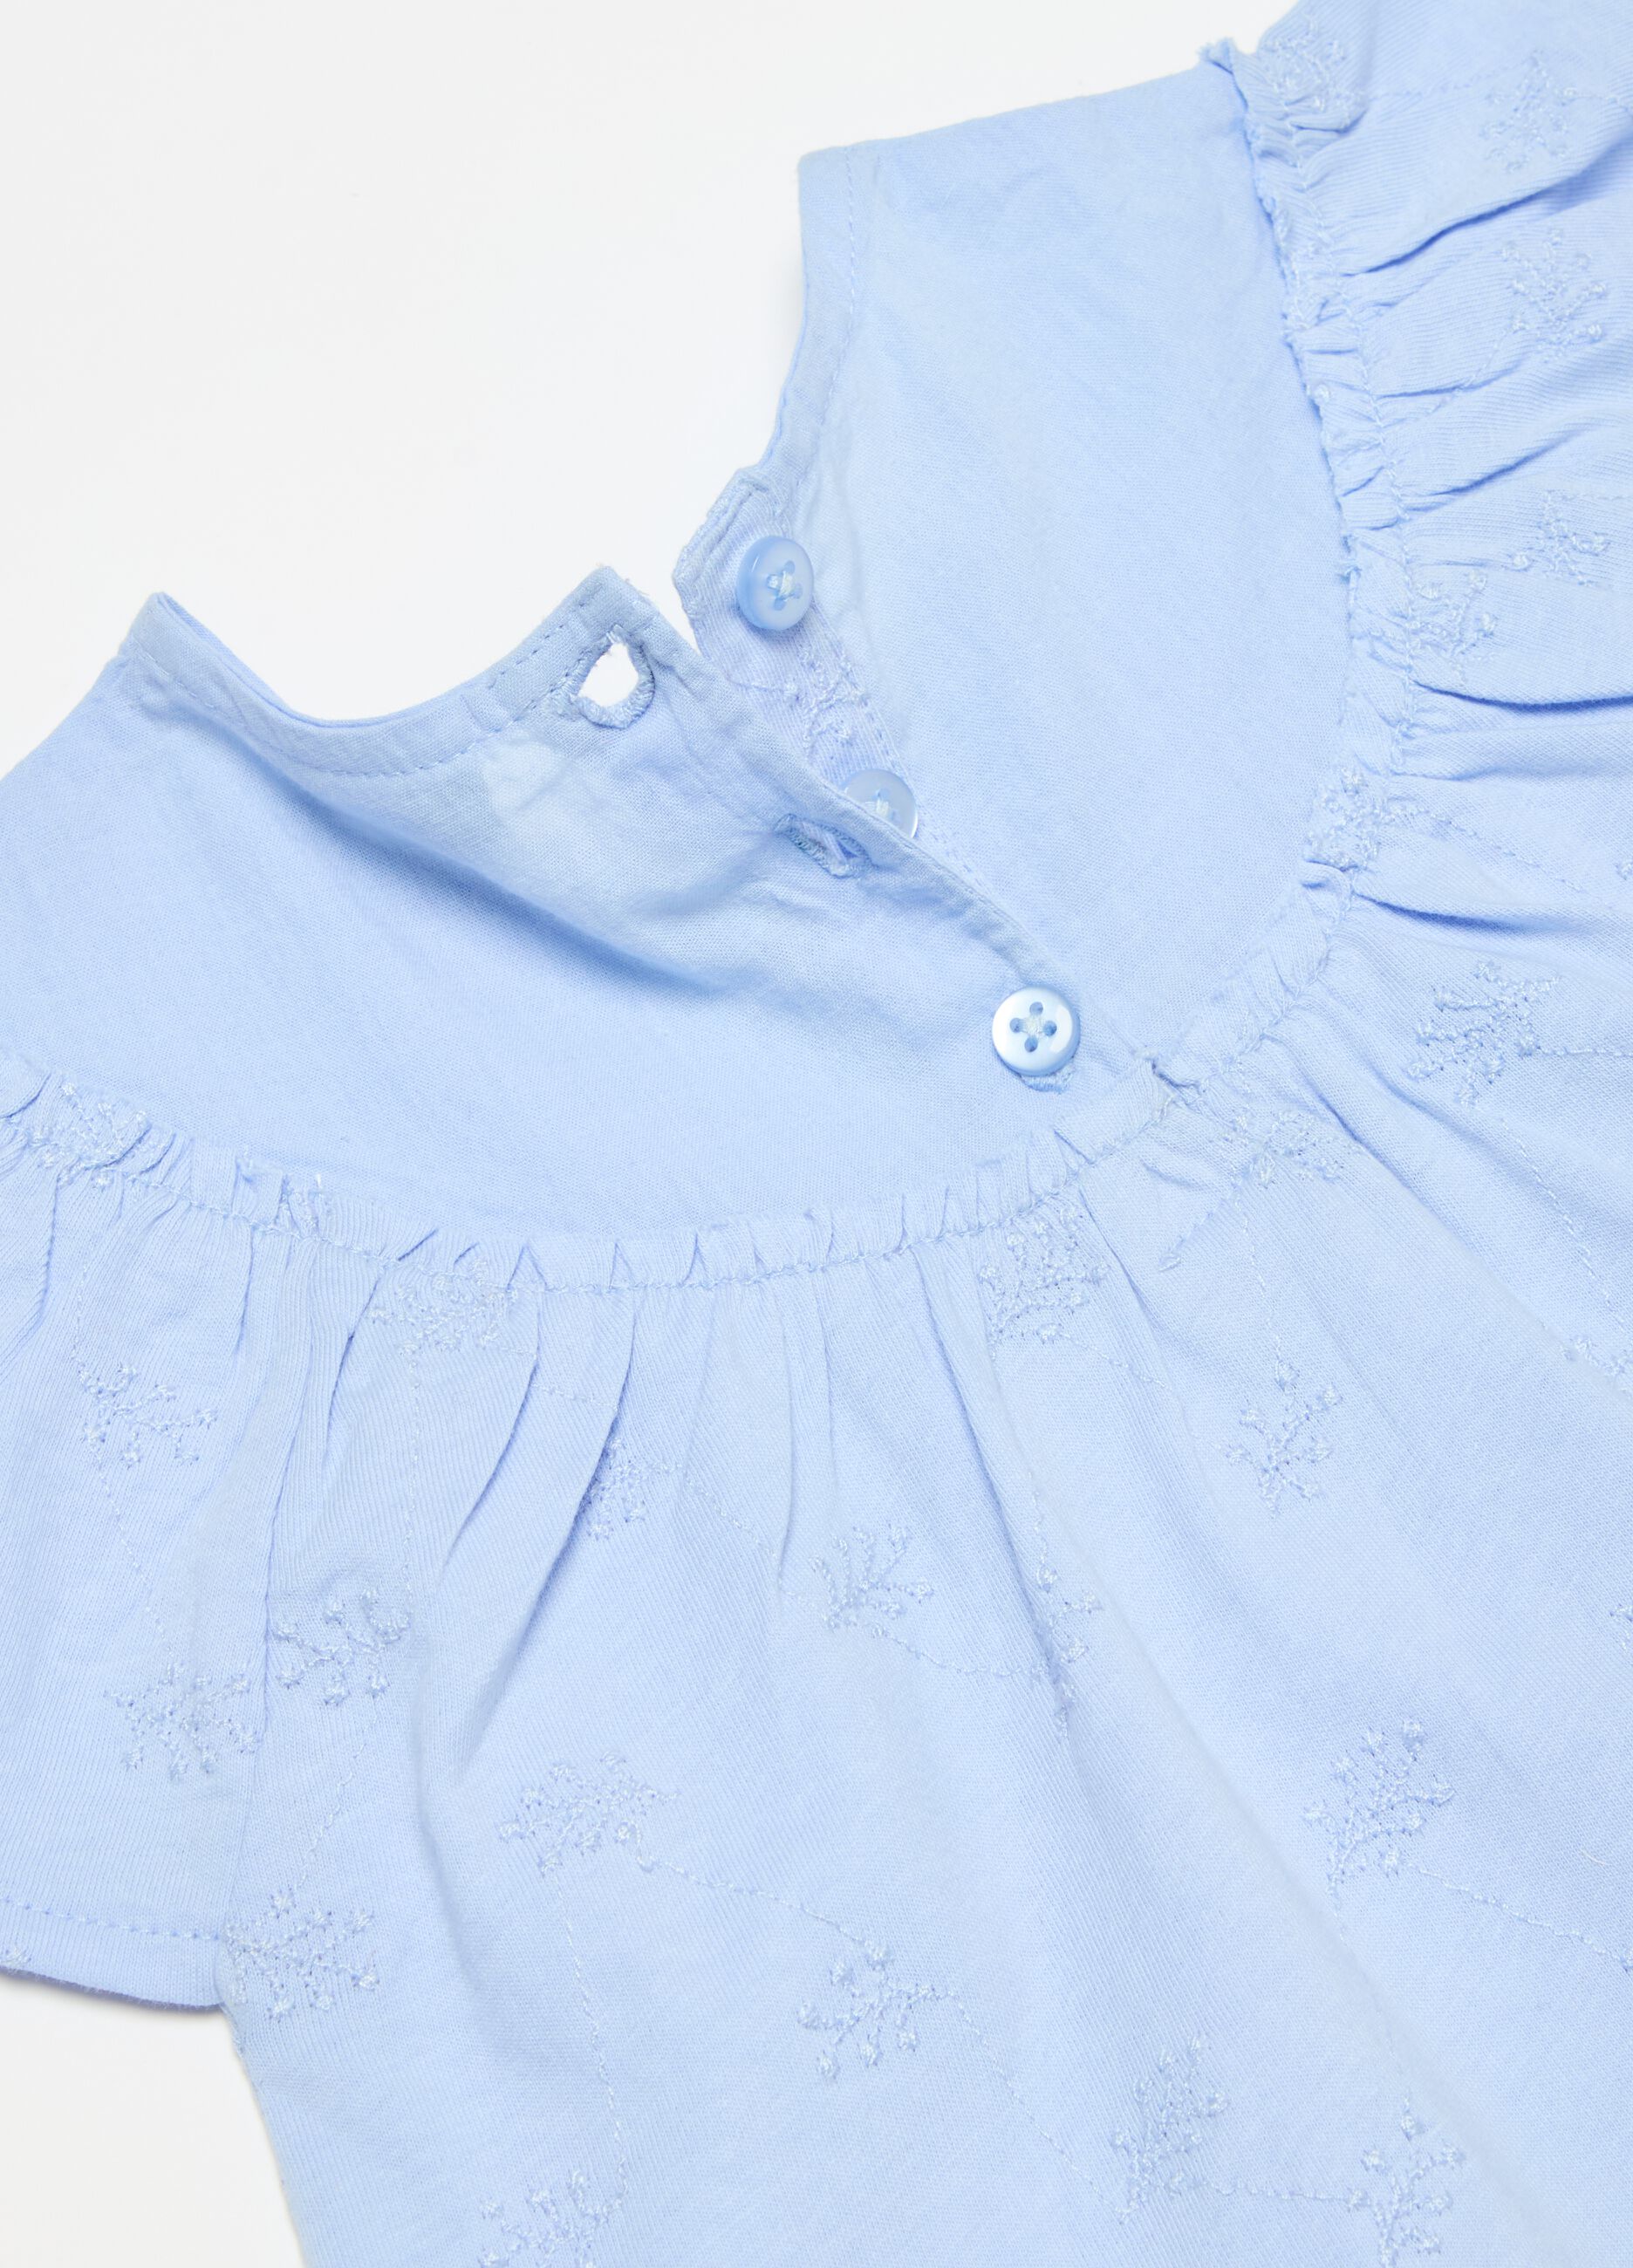 Cotton T-shirt with flowers embroidery